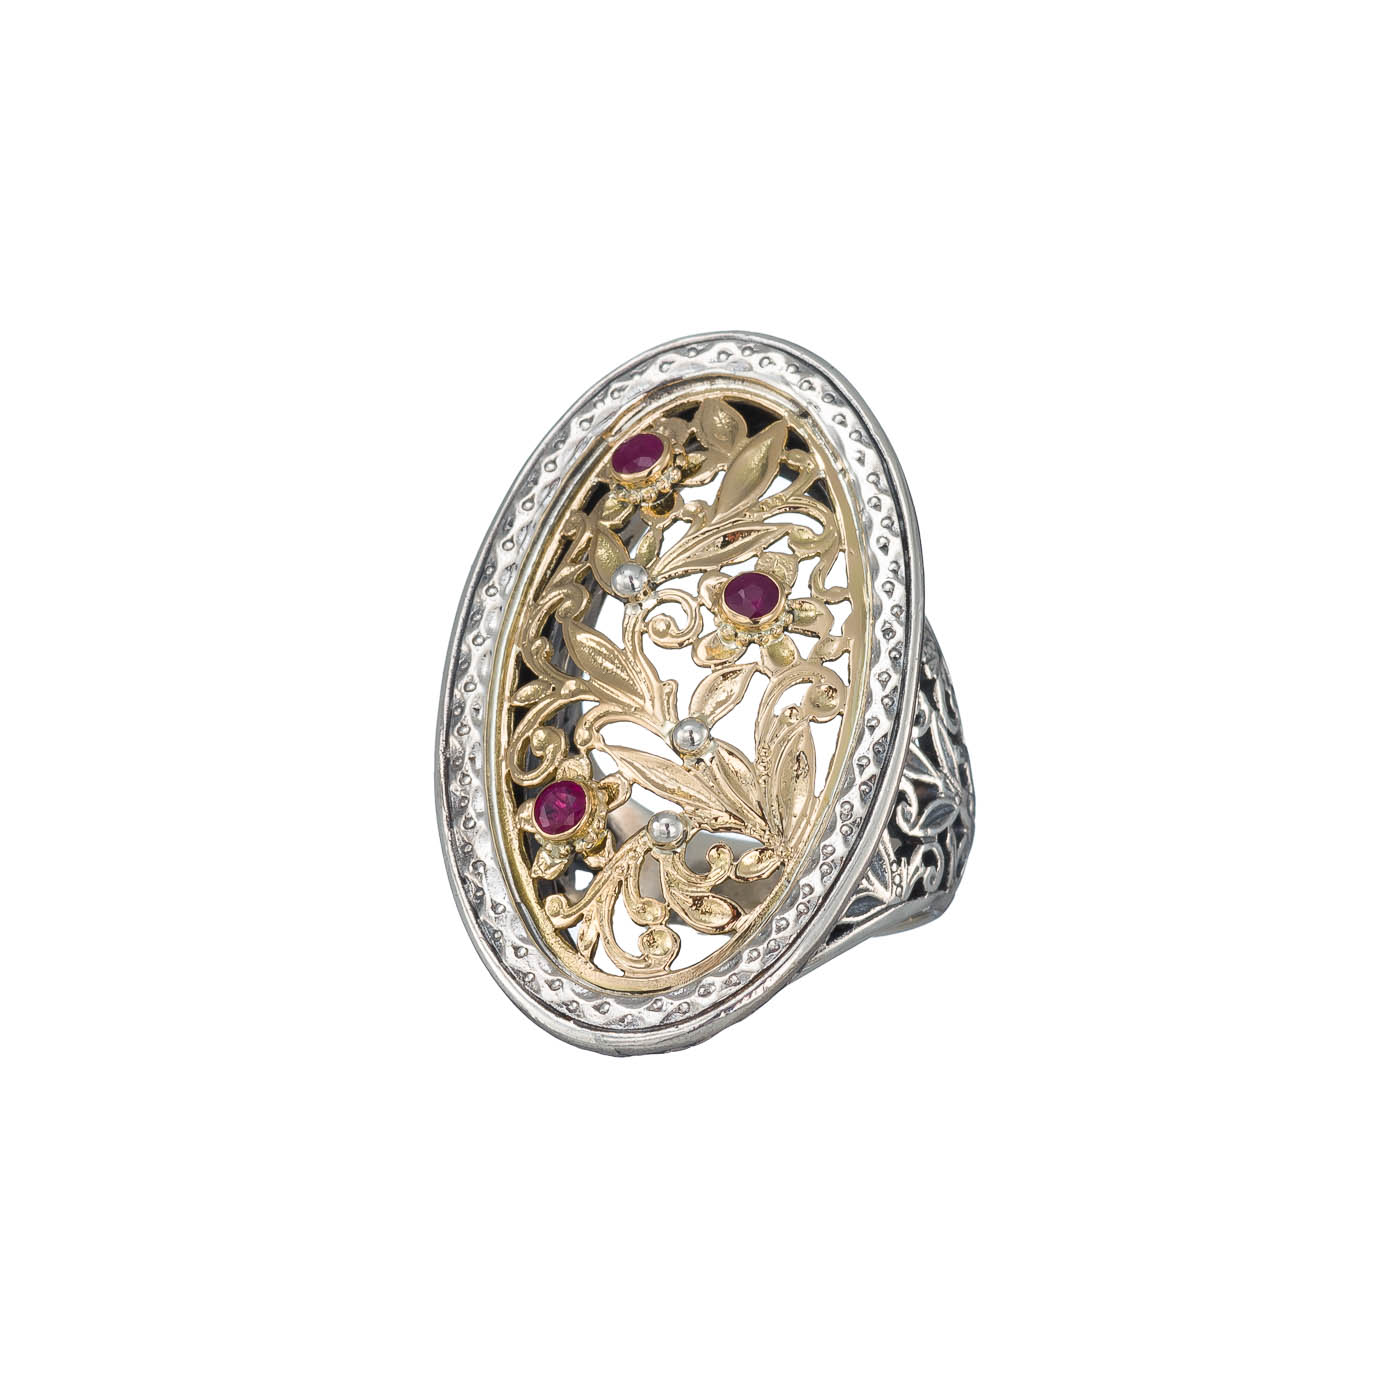 Garden shadows big oval ring in 18K Gold and Sterling Silver and rubies